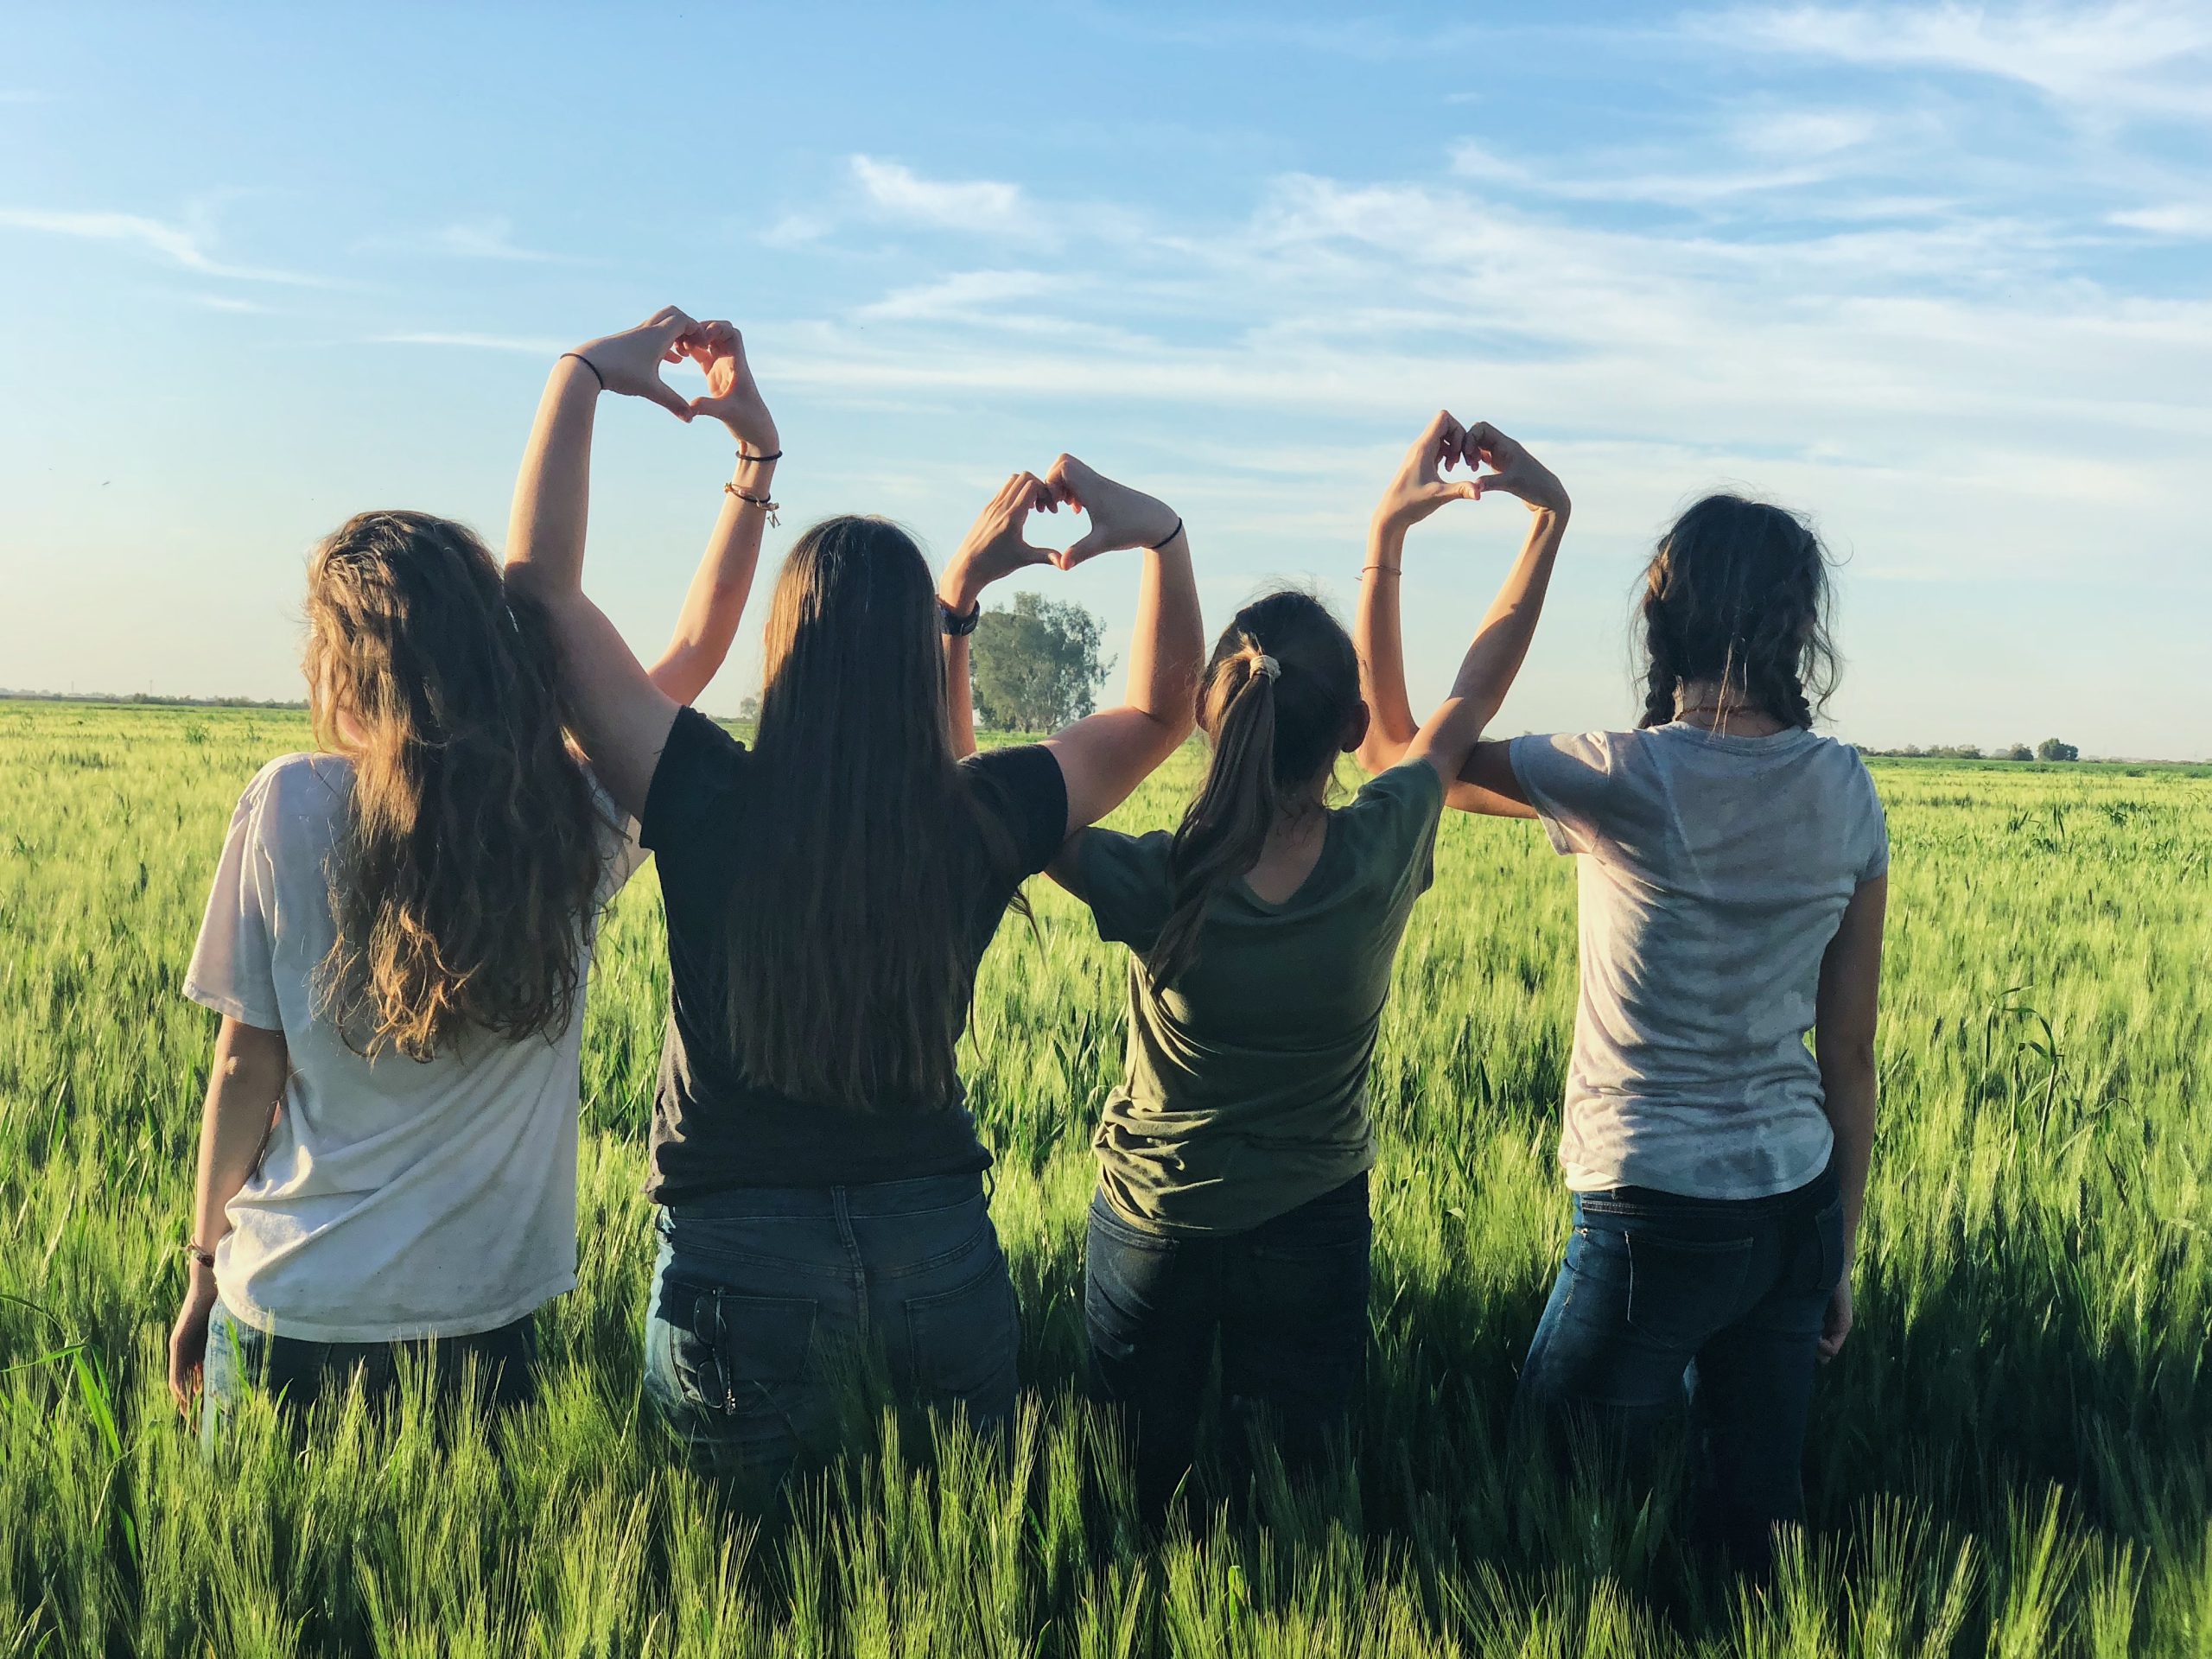 Four young white women stand in a field of tall grass facing away from the viewer. Their arms are over their heads linking their hands in the Heart symbol